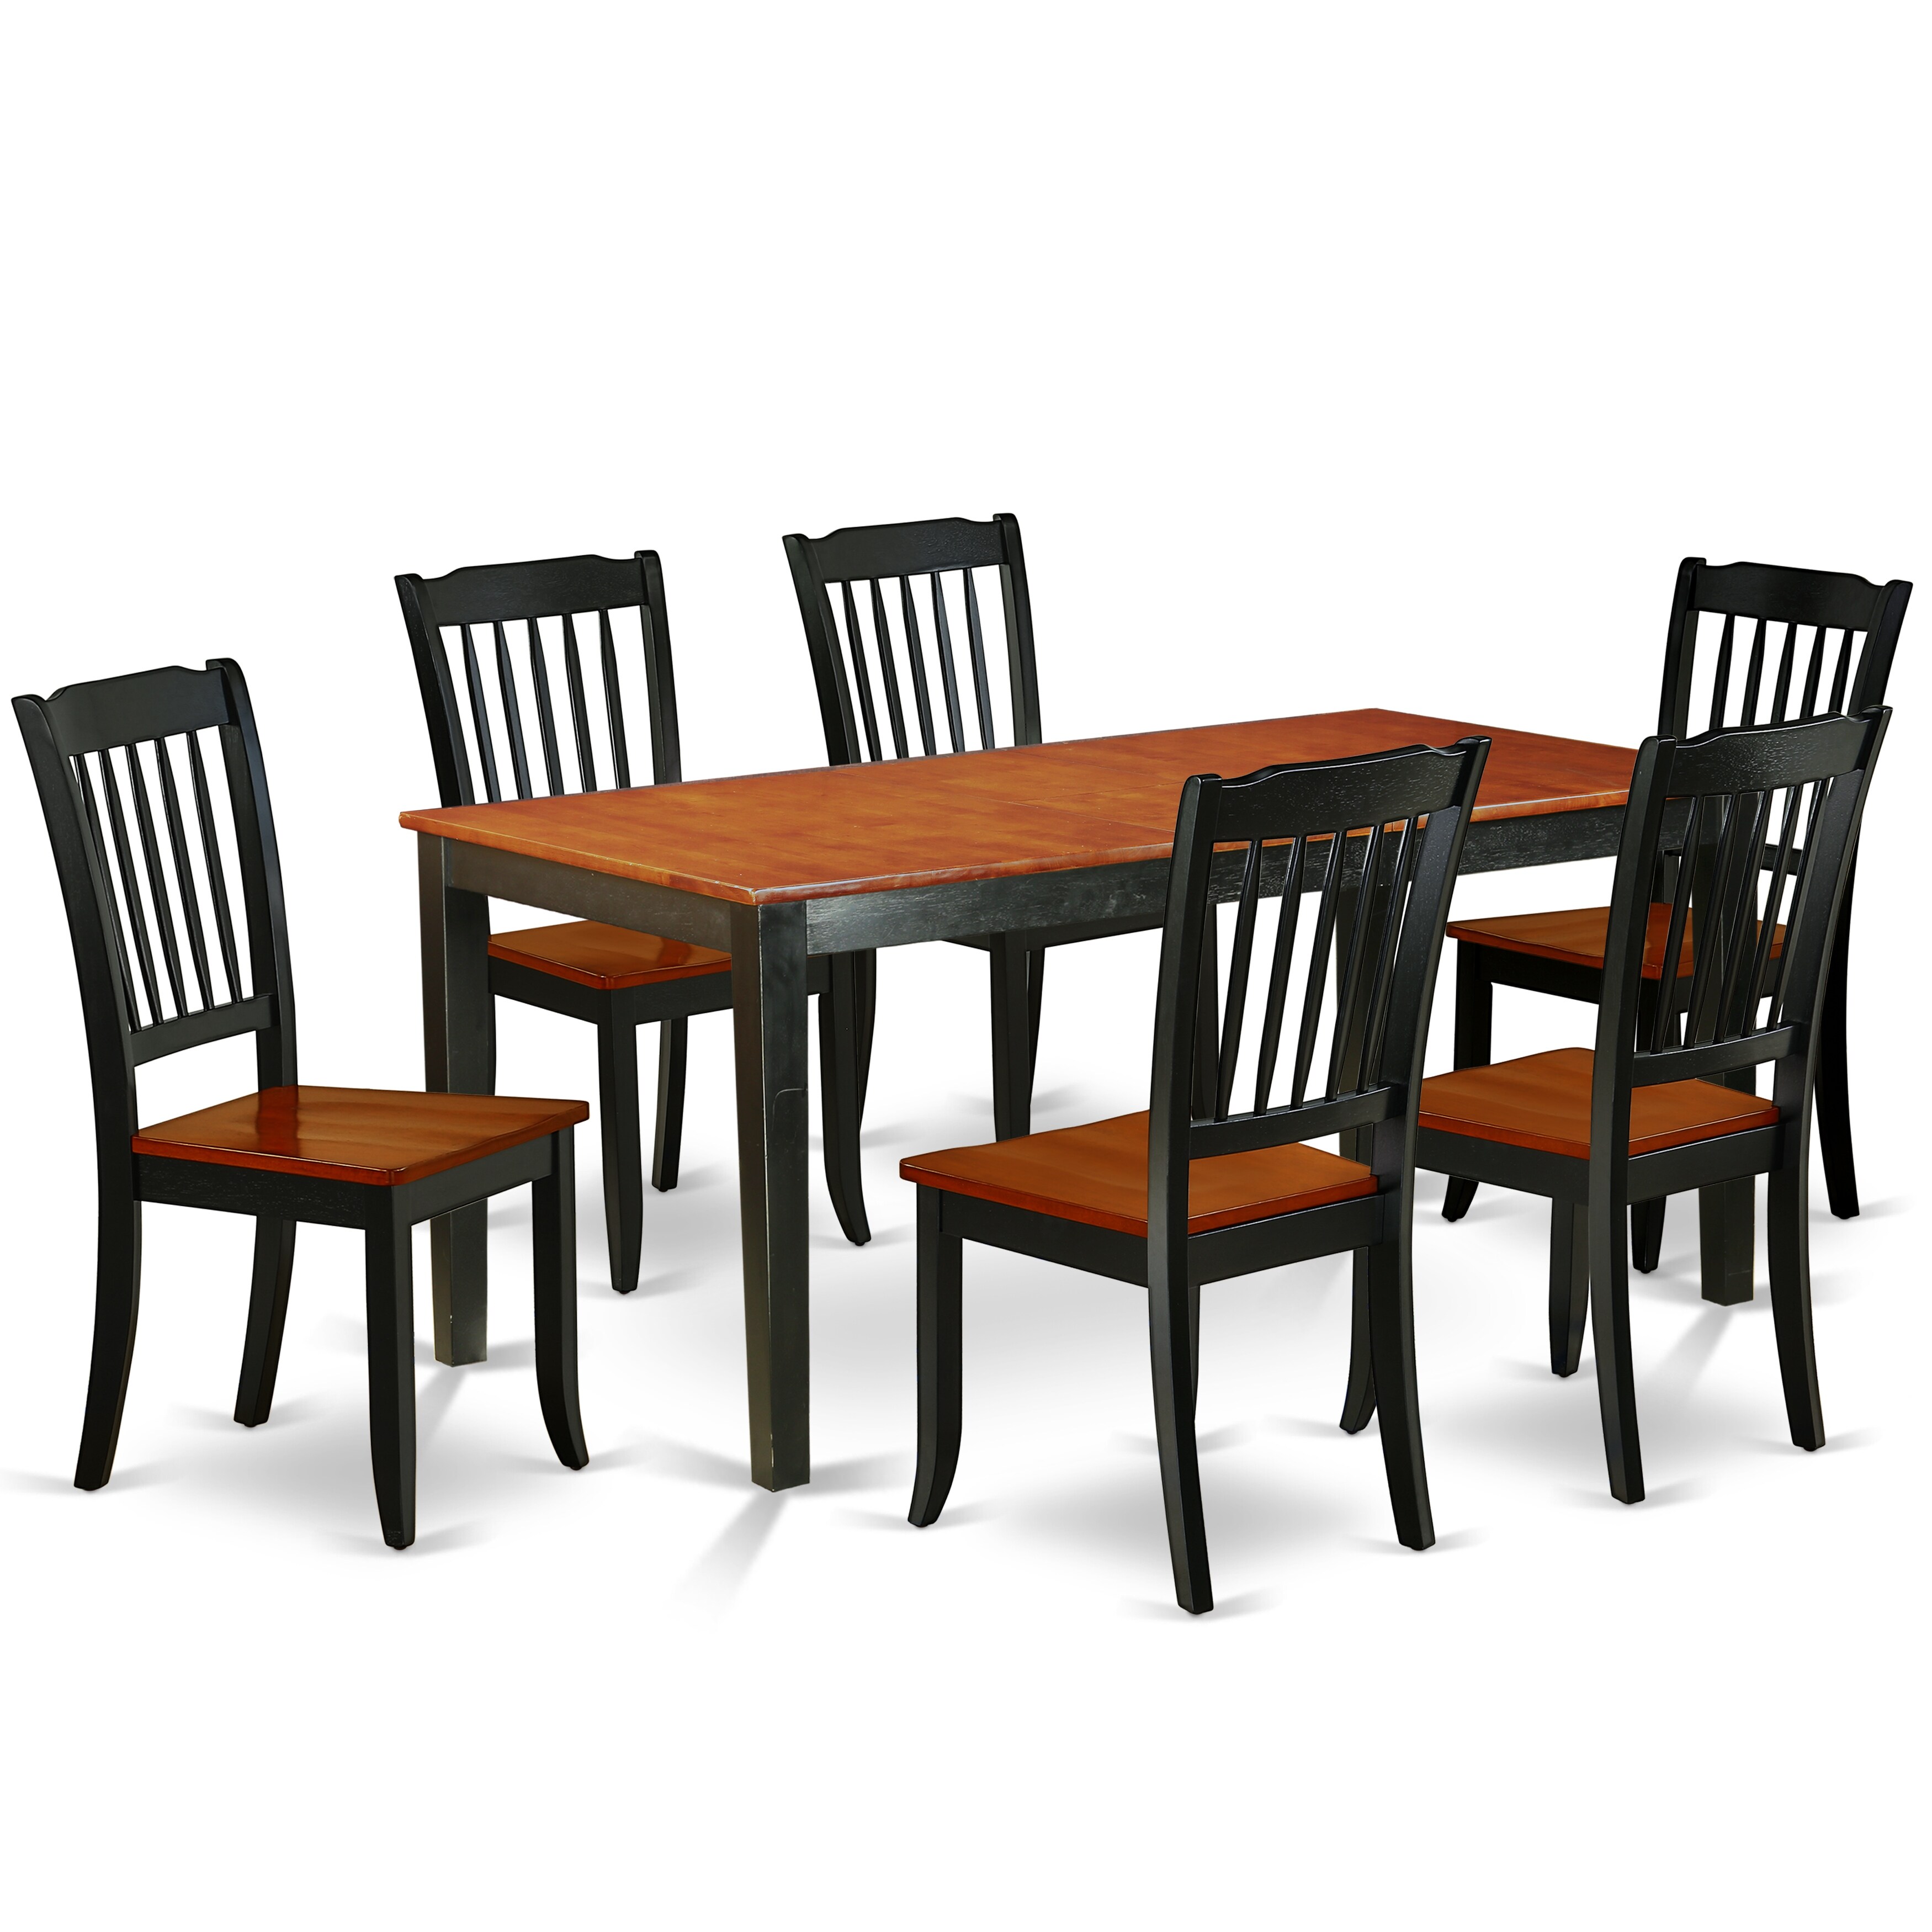 East West Furniture Kitchen Table & Chairs Set